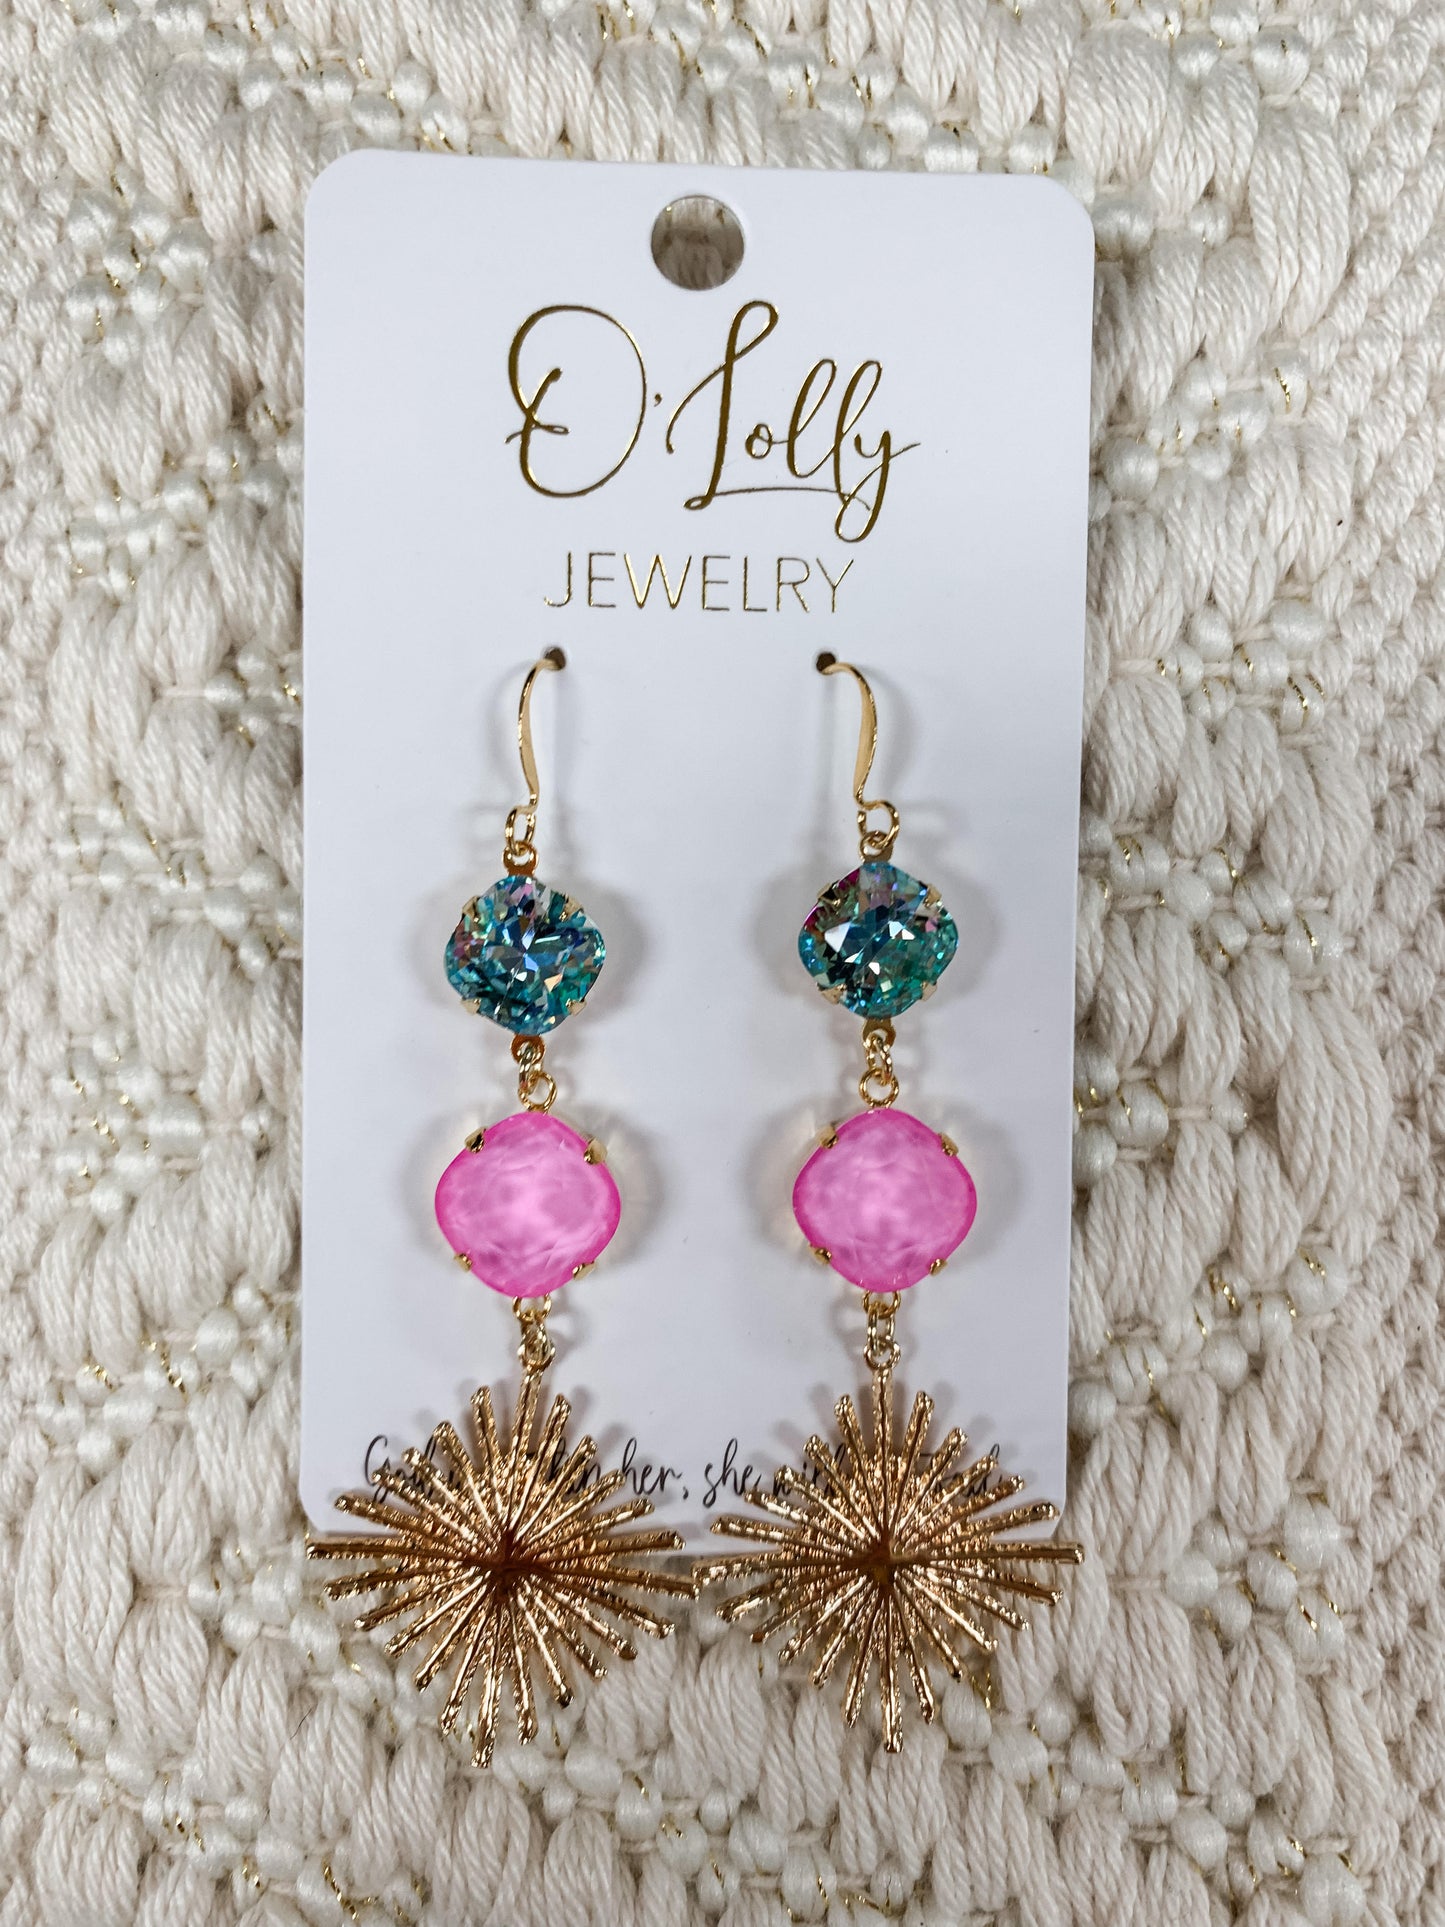 Sunny Day Earrings by O'Lolly Jewelry